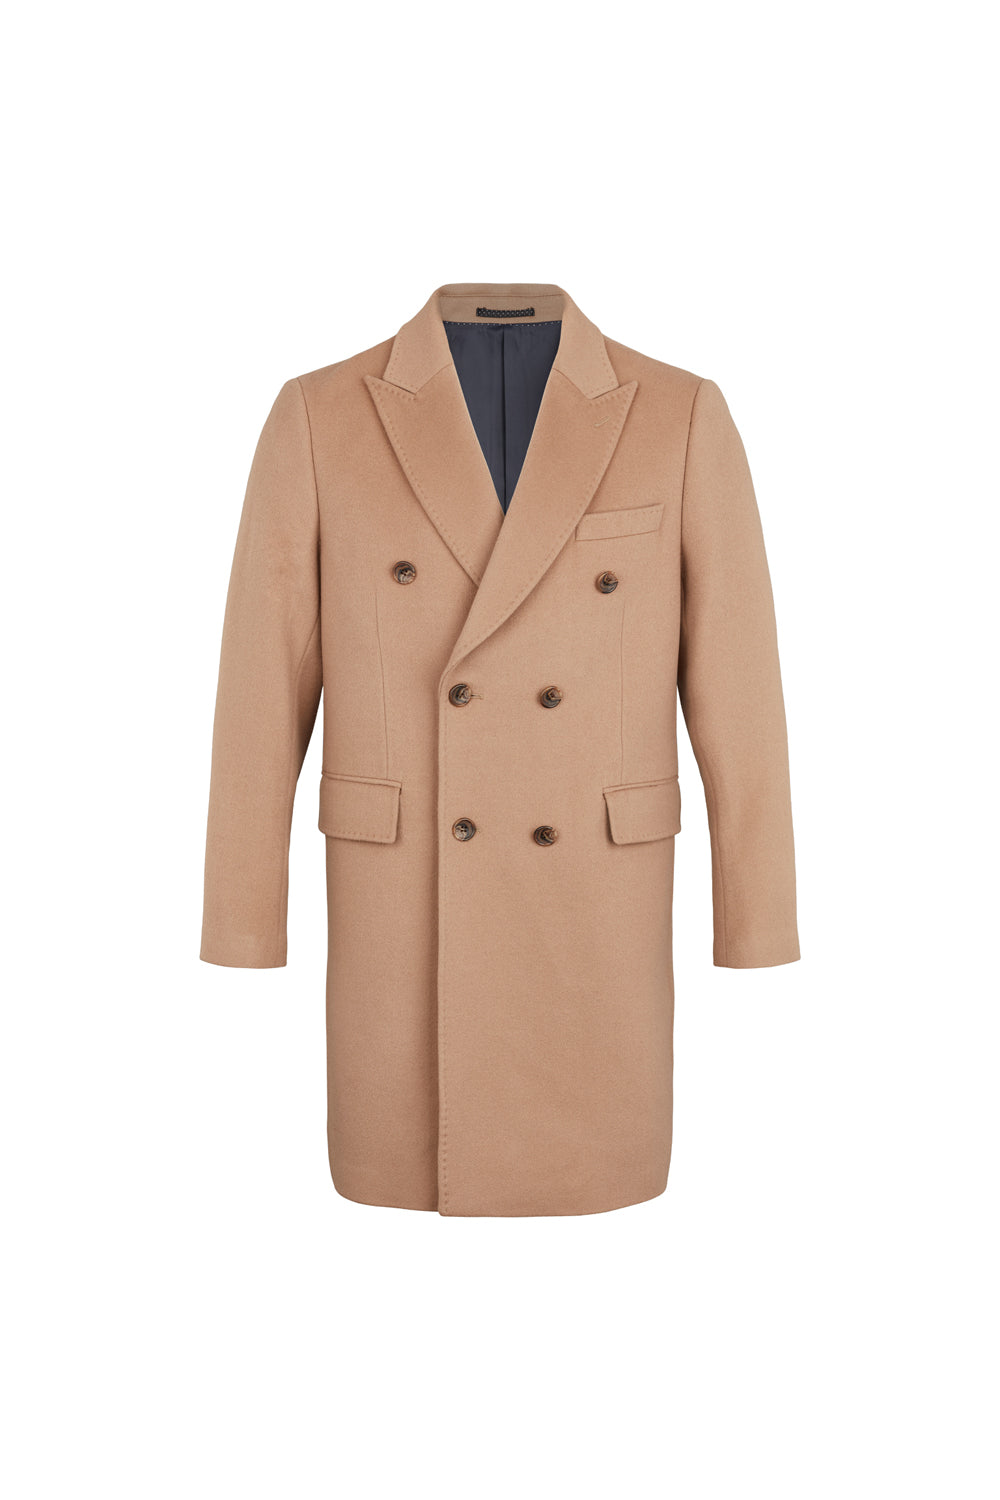 Buy the Sand Copenhagen Cashmere Coat Sultan in Camel at Intro. Spend £50 for free UK delivery. Official stockists. We ship worldwide.